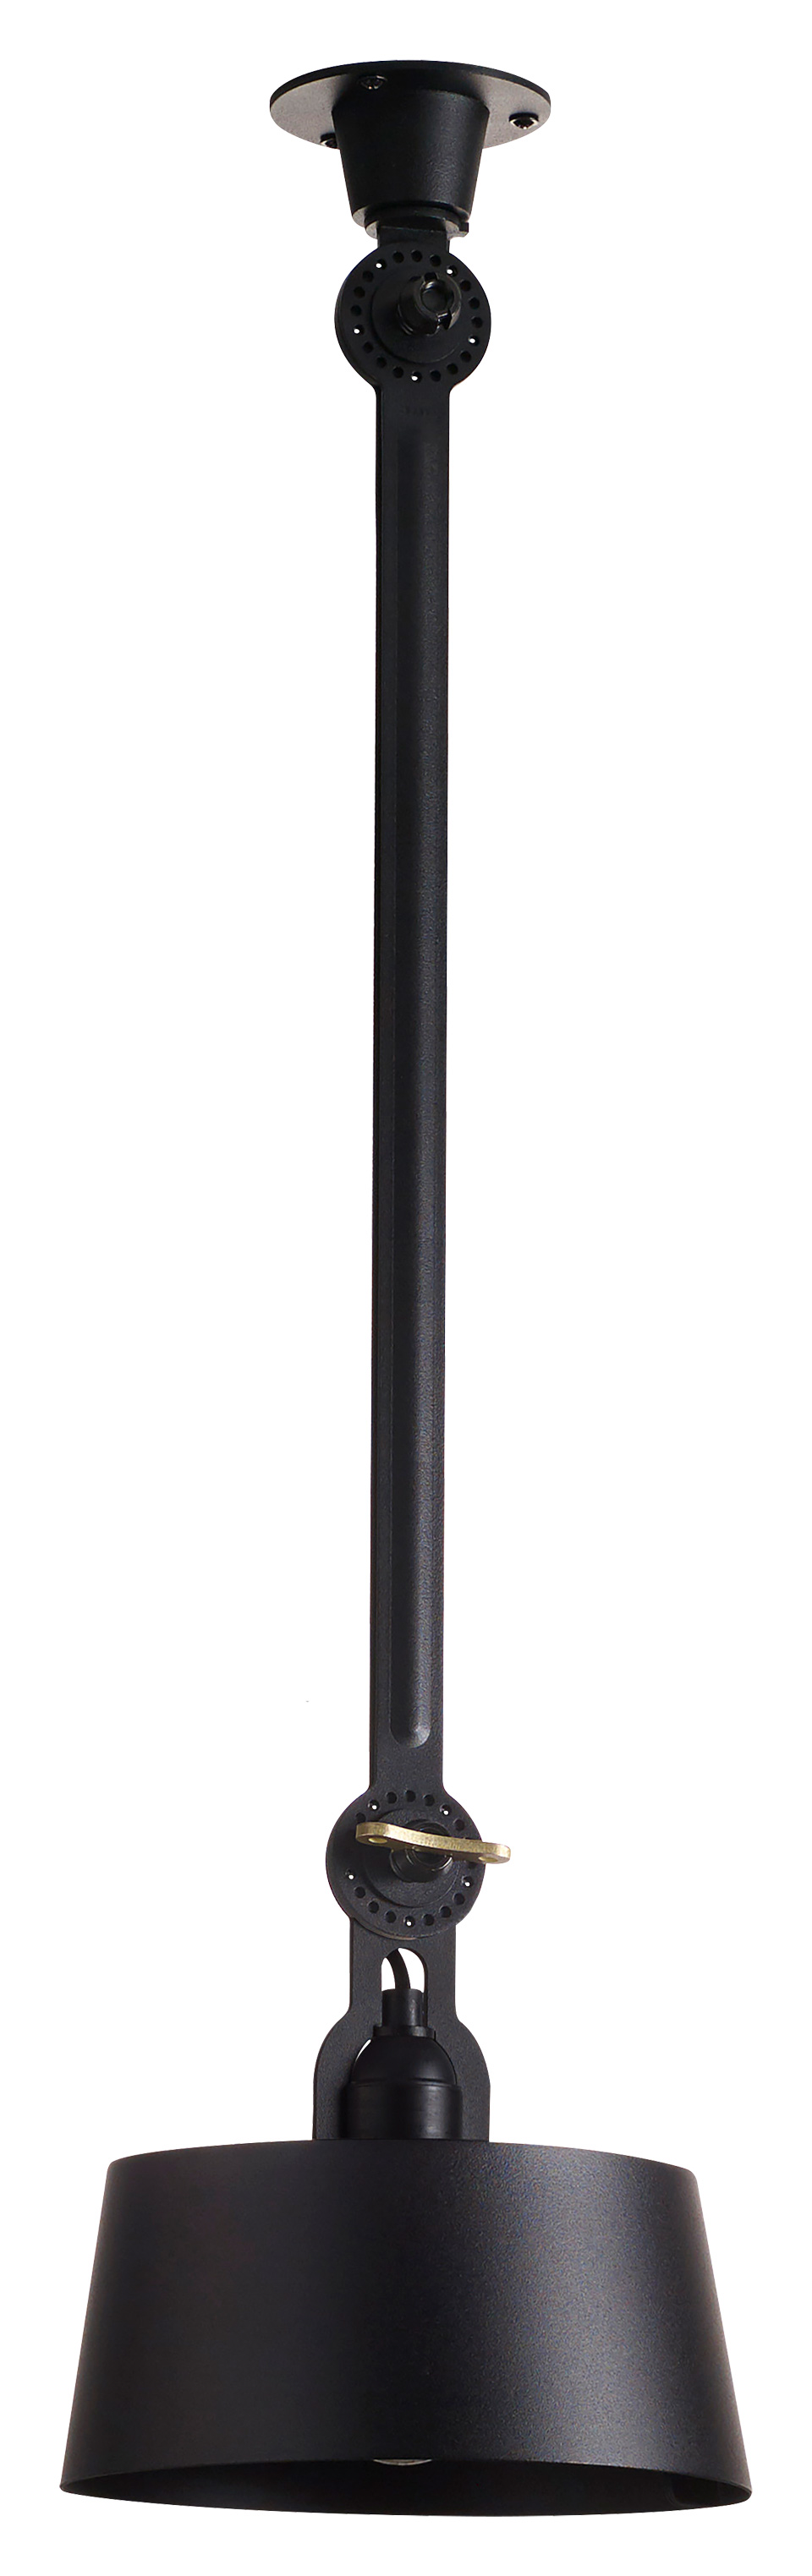 Bolt ceiling lamp, vertically fitted under one 50cm rod (underfit). Tonone. 